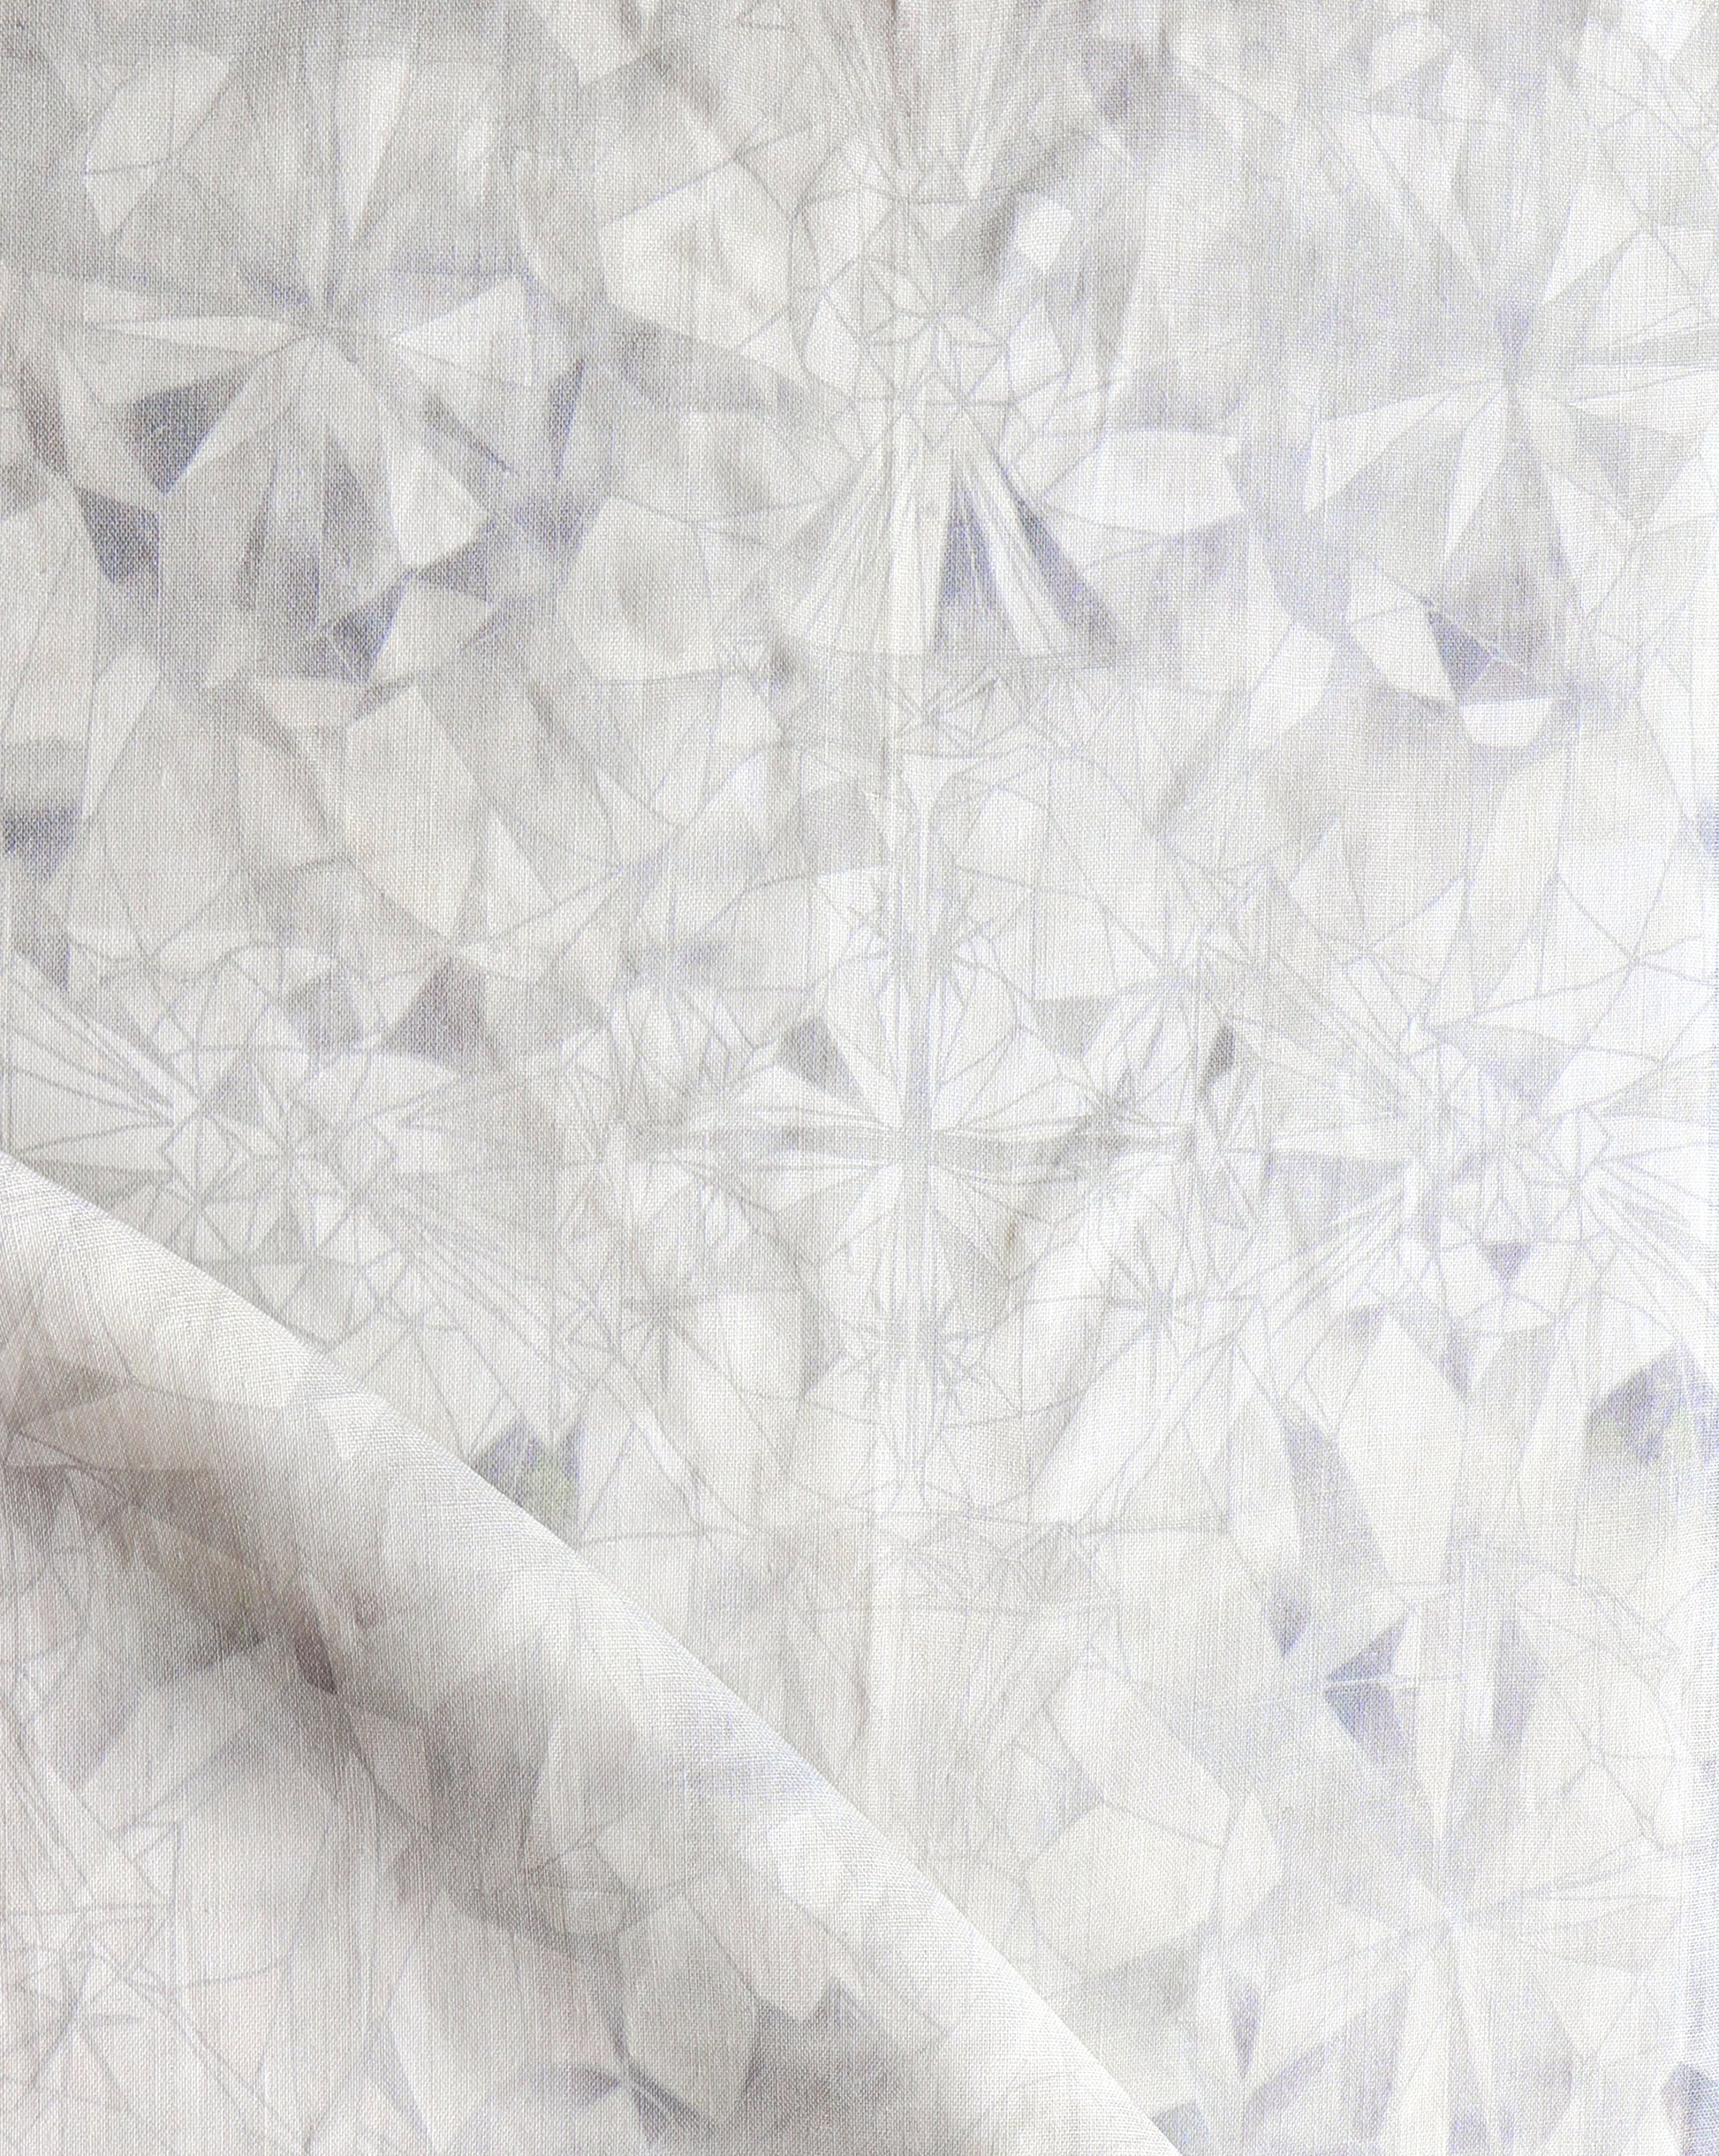 A close up of a white Solitaire Fabric Pearl with a Solitaire pattern on it